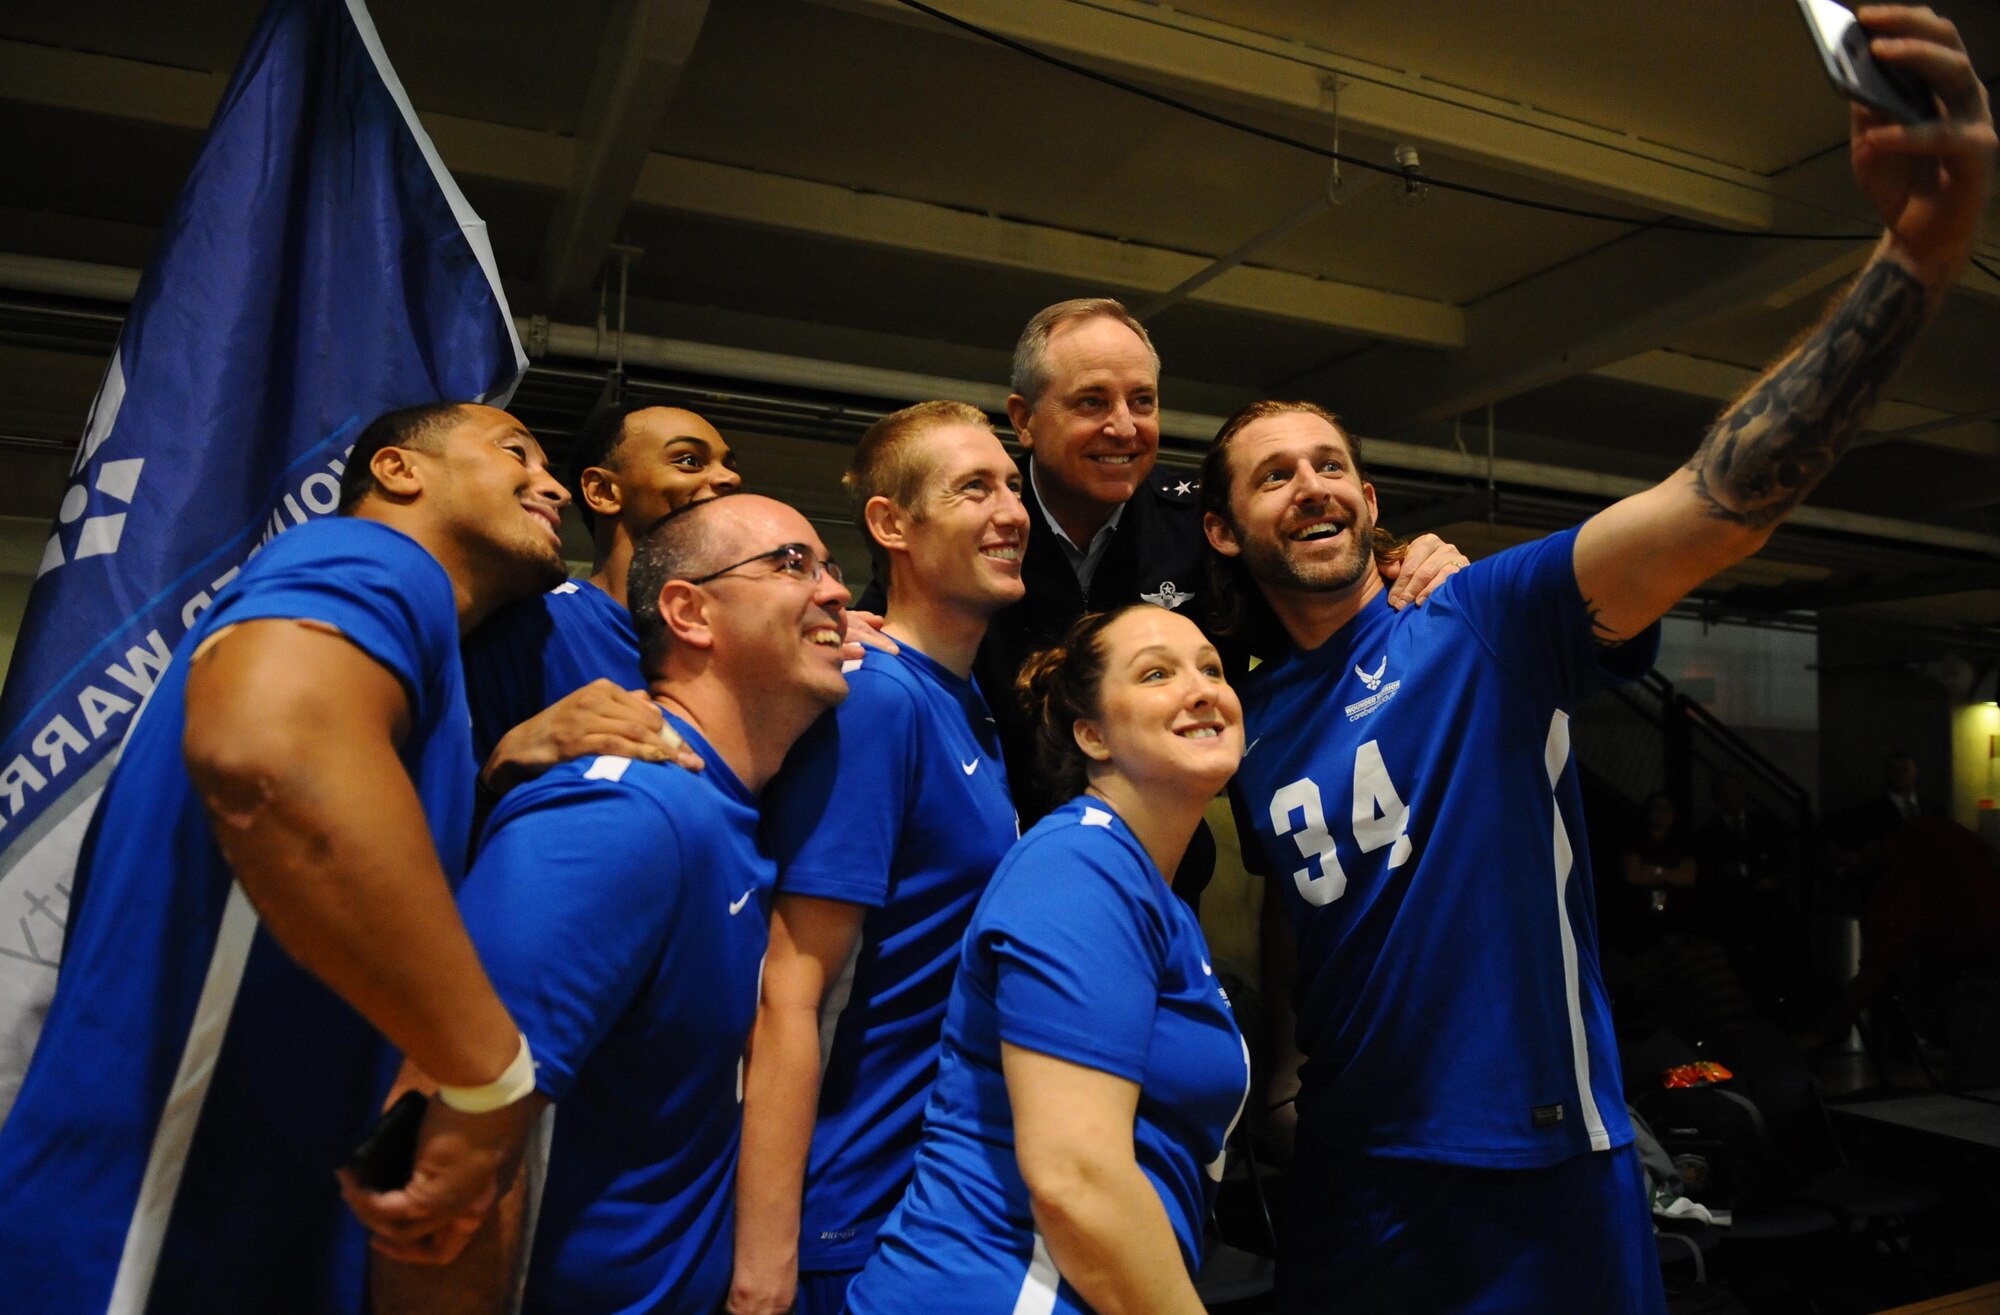 Air Force Chief of Staff Gen. Mark A. Welsh III takes a selfie with Air Force wounded warriors after they won the Warrior Care Month Sitting Volleyball Tournament championship match at the Pentagon in Washington, D.C., Nov. 19, 2015. The Air Force team edged out the Marines in the final match. (U.S. Air Force photo/Senior Airman Hailey Haux) 